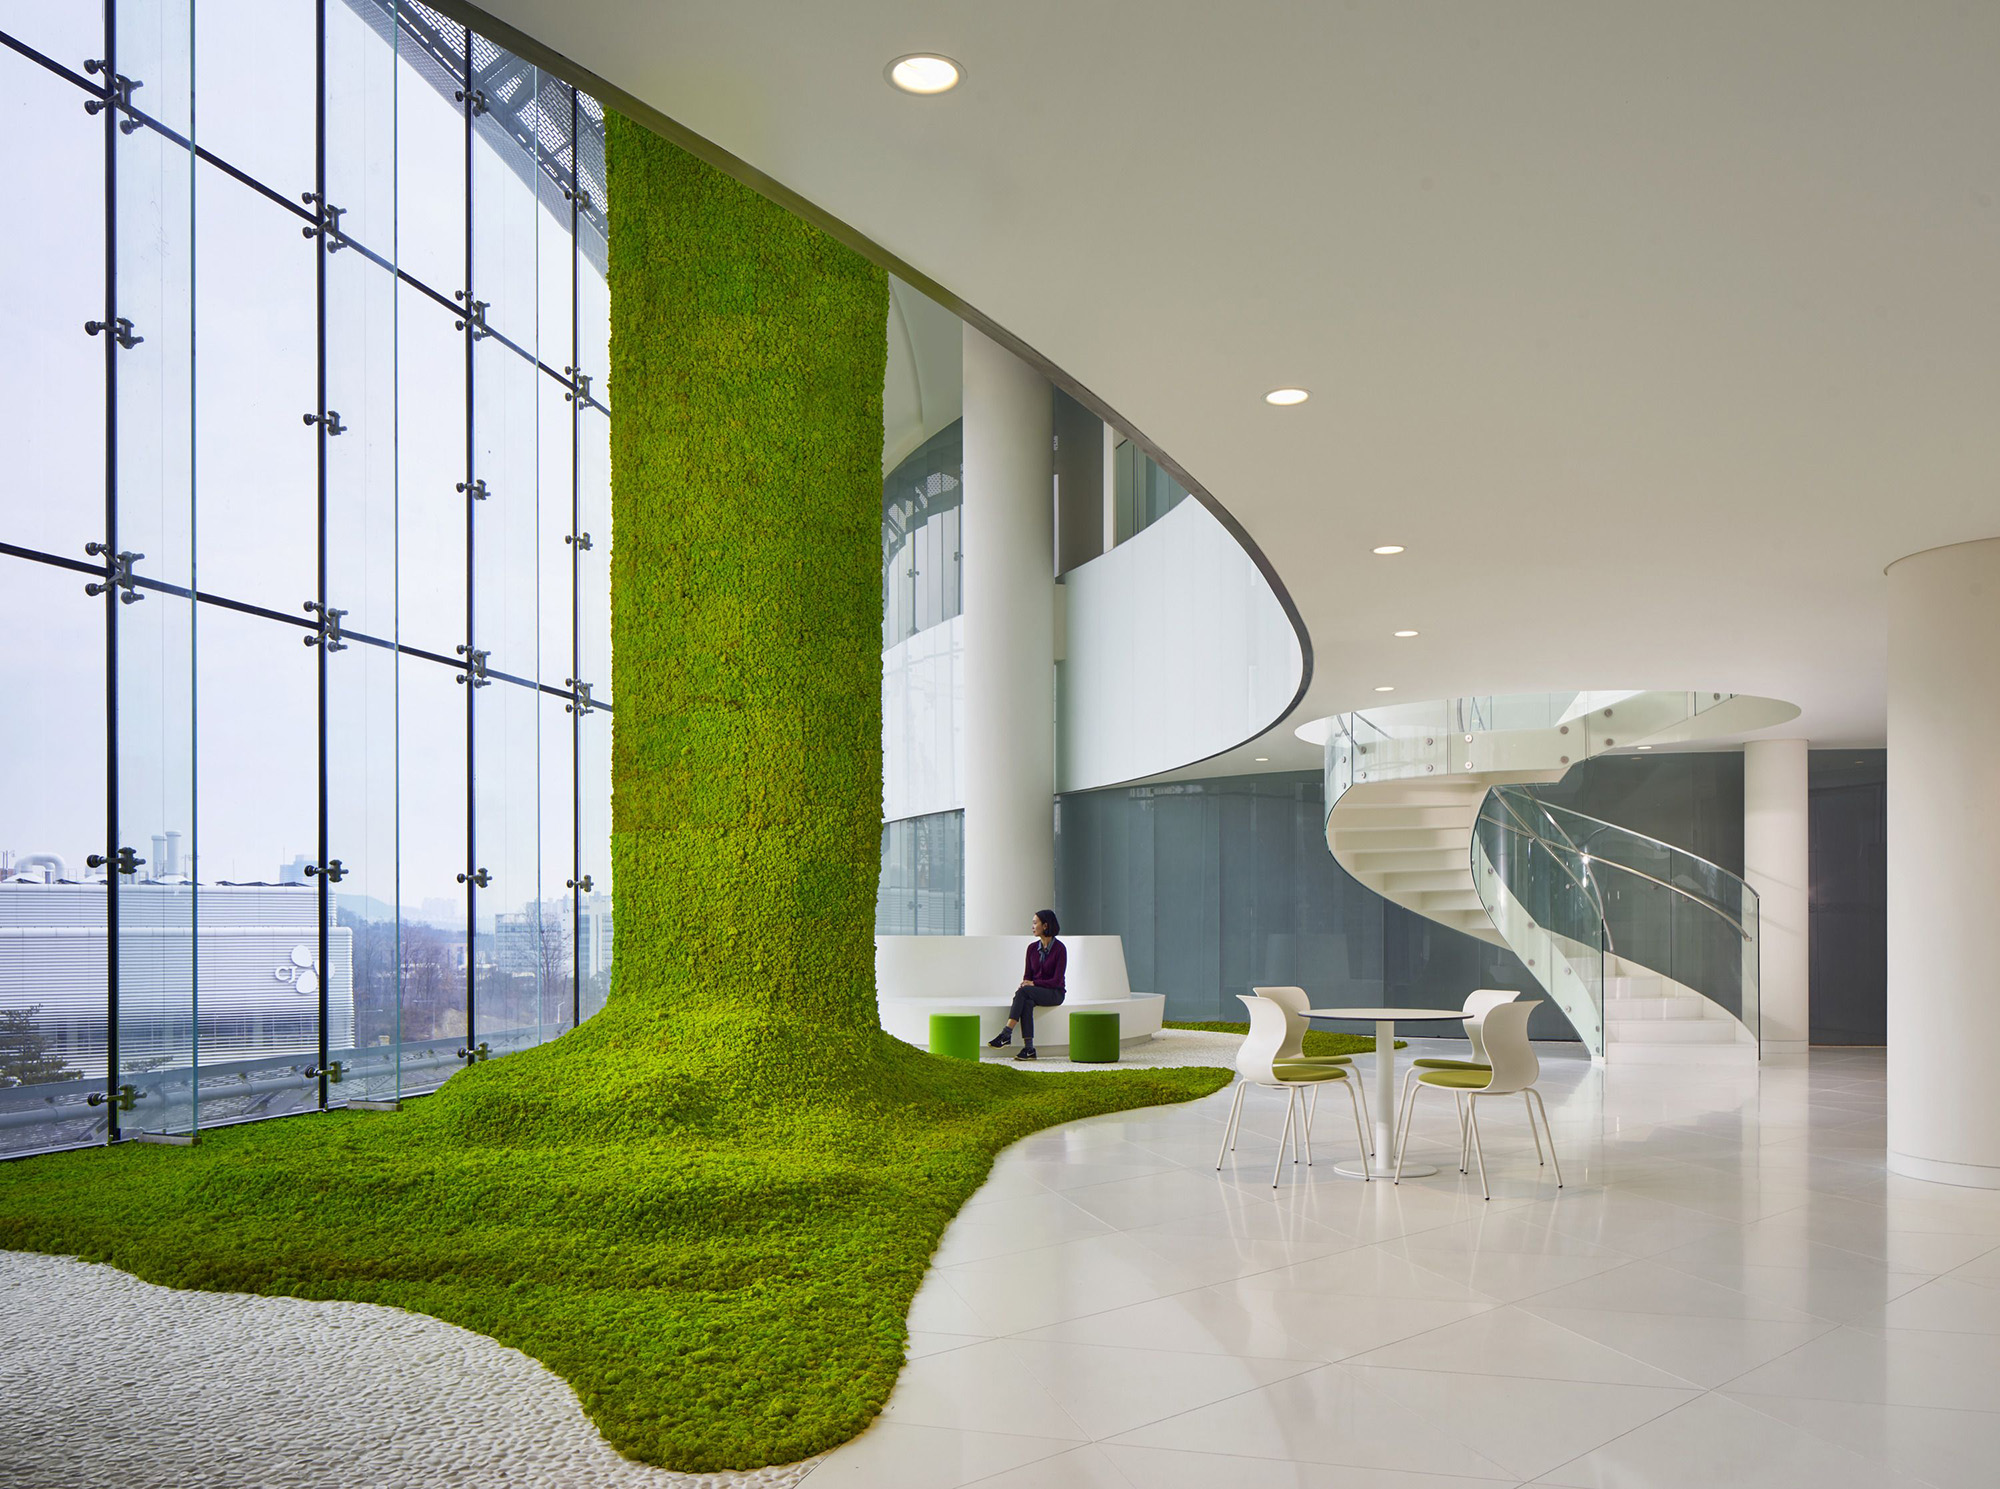 Nature infused into building interior